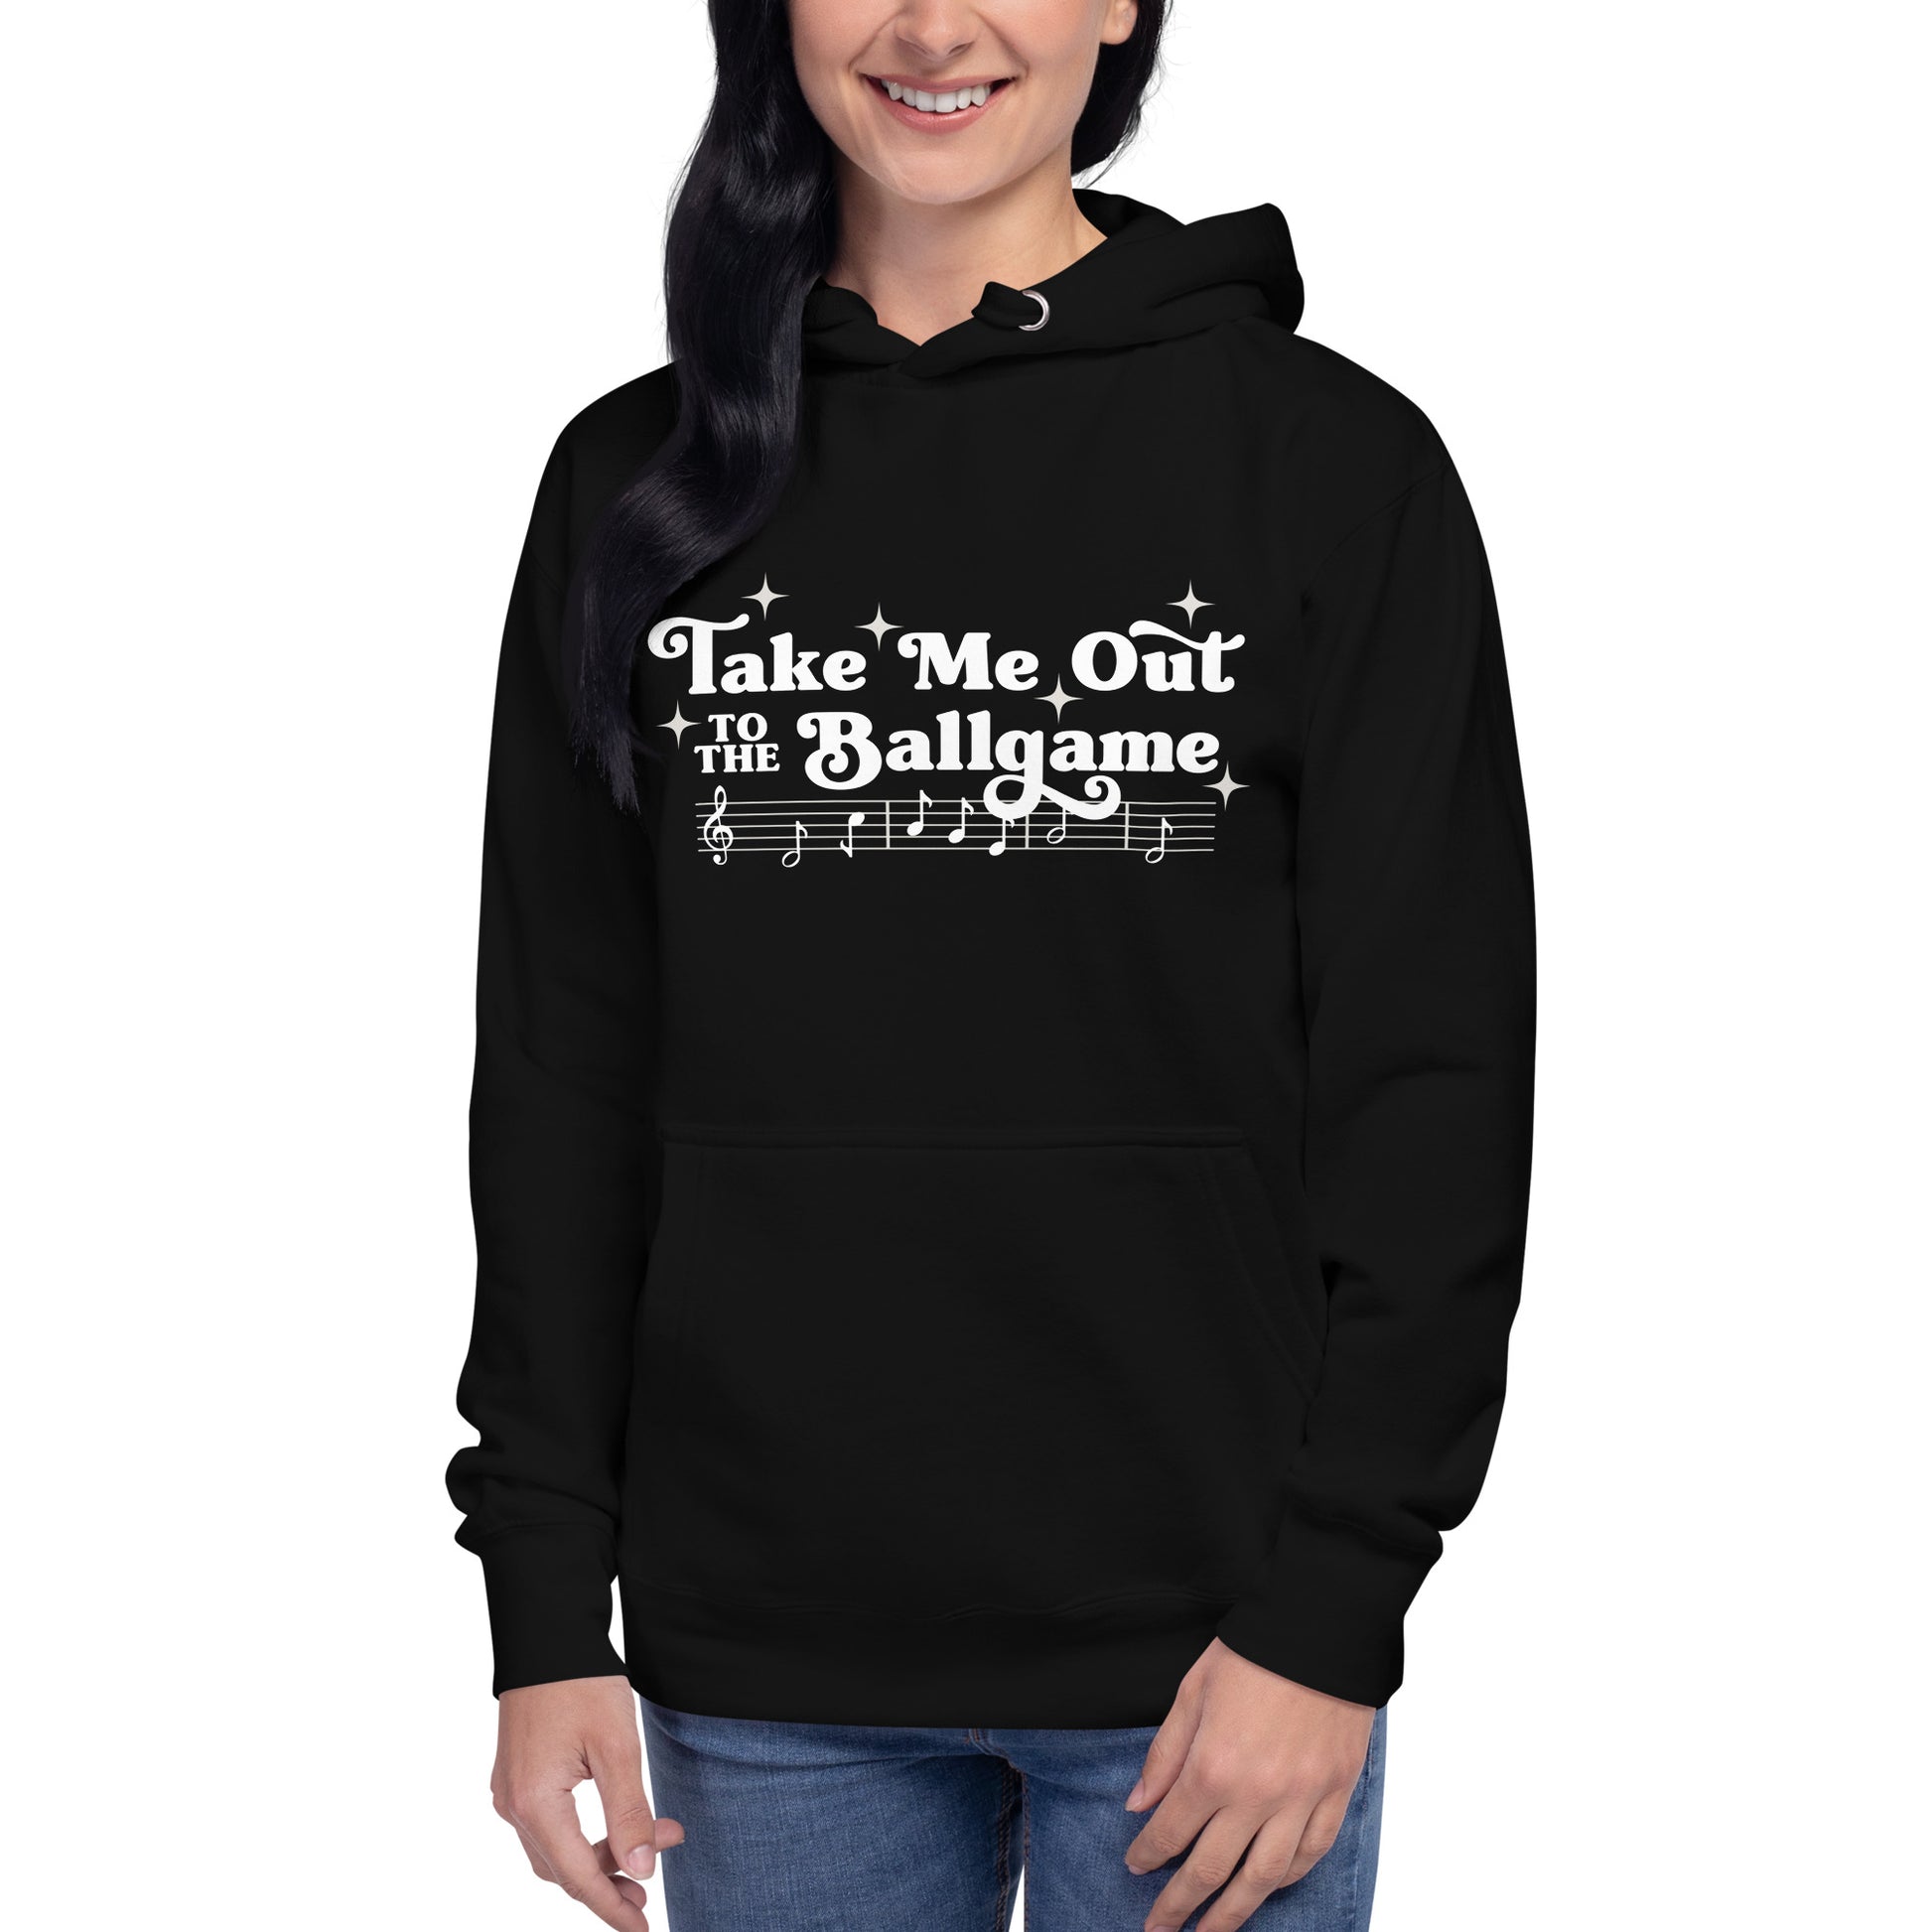 Image of woman wearing black hoodie with design of "Take Me Out to the Ballgame" with coordinating musical notes in white located on centre chest. This design is exclusive to Tailgate Mercantile and available only online.